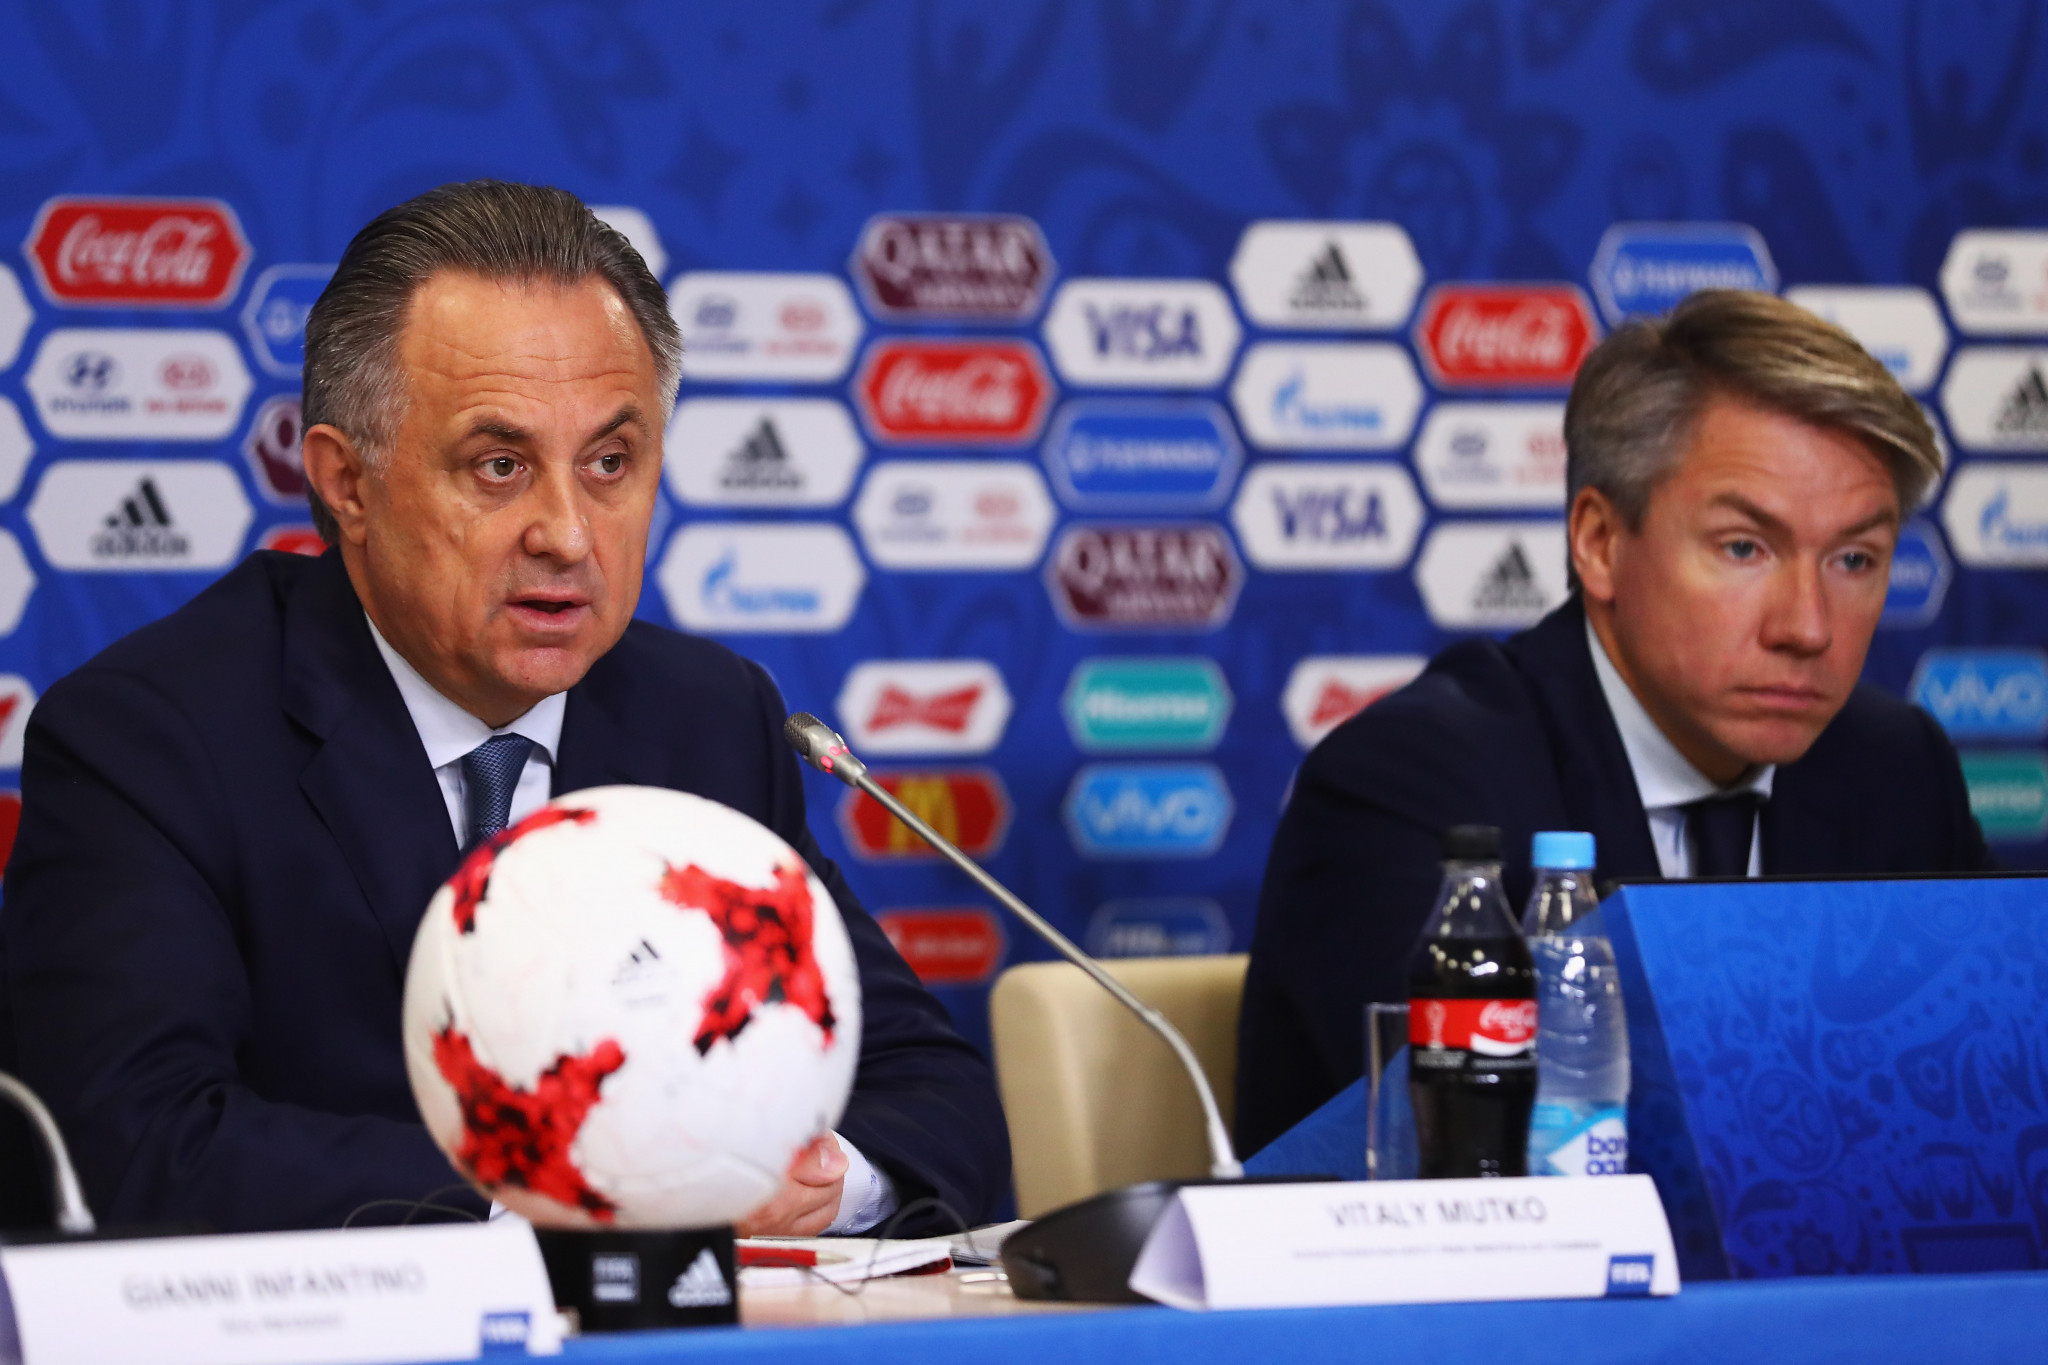 Russia's Deputy Prime Minister Vitaly Mutko, left, was barred from standing for re-election to the FIFA Council in March ©Getty Images